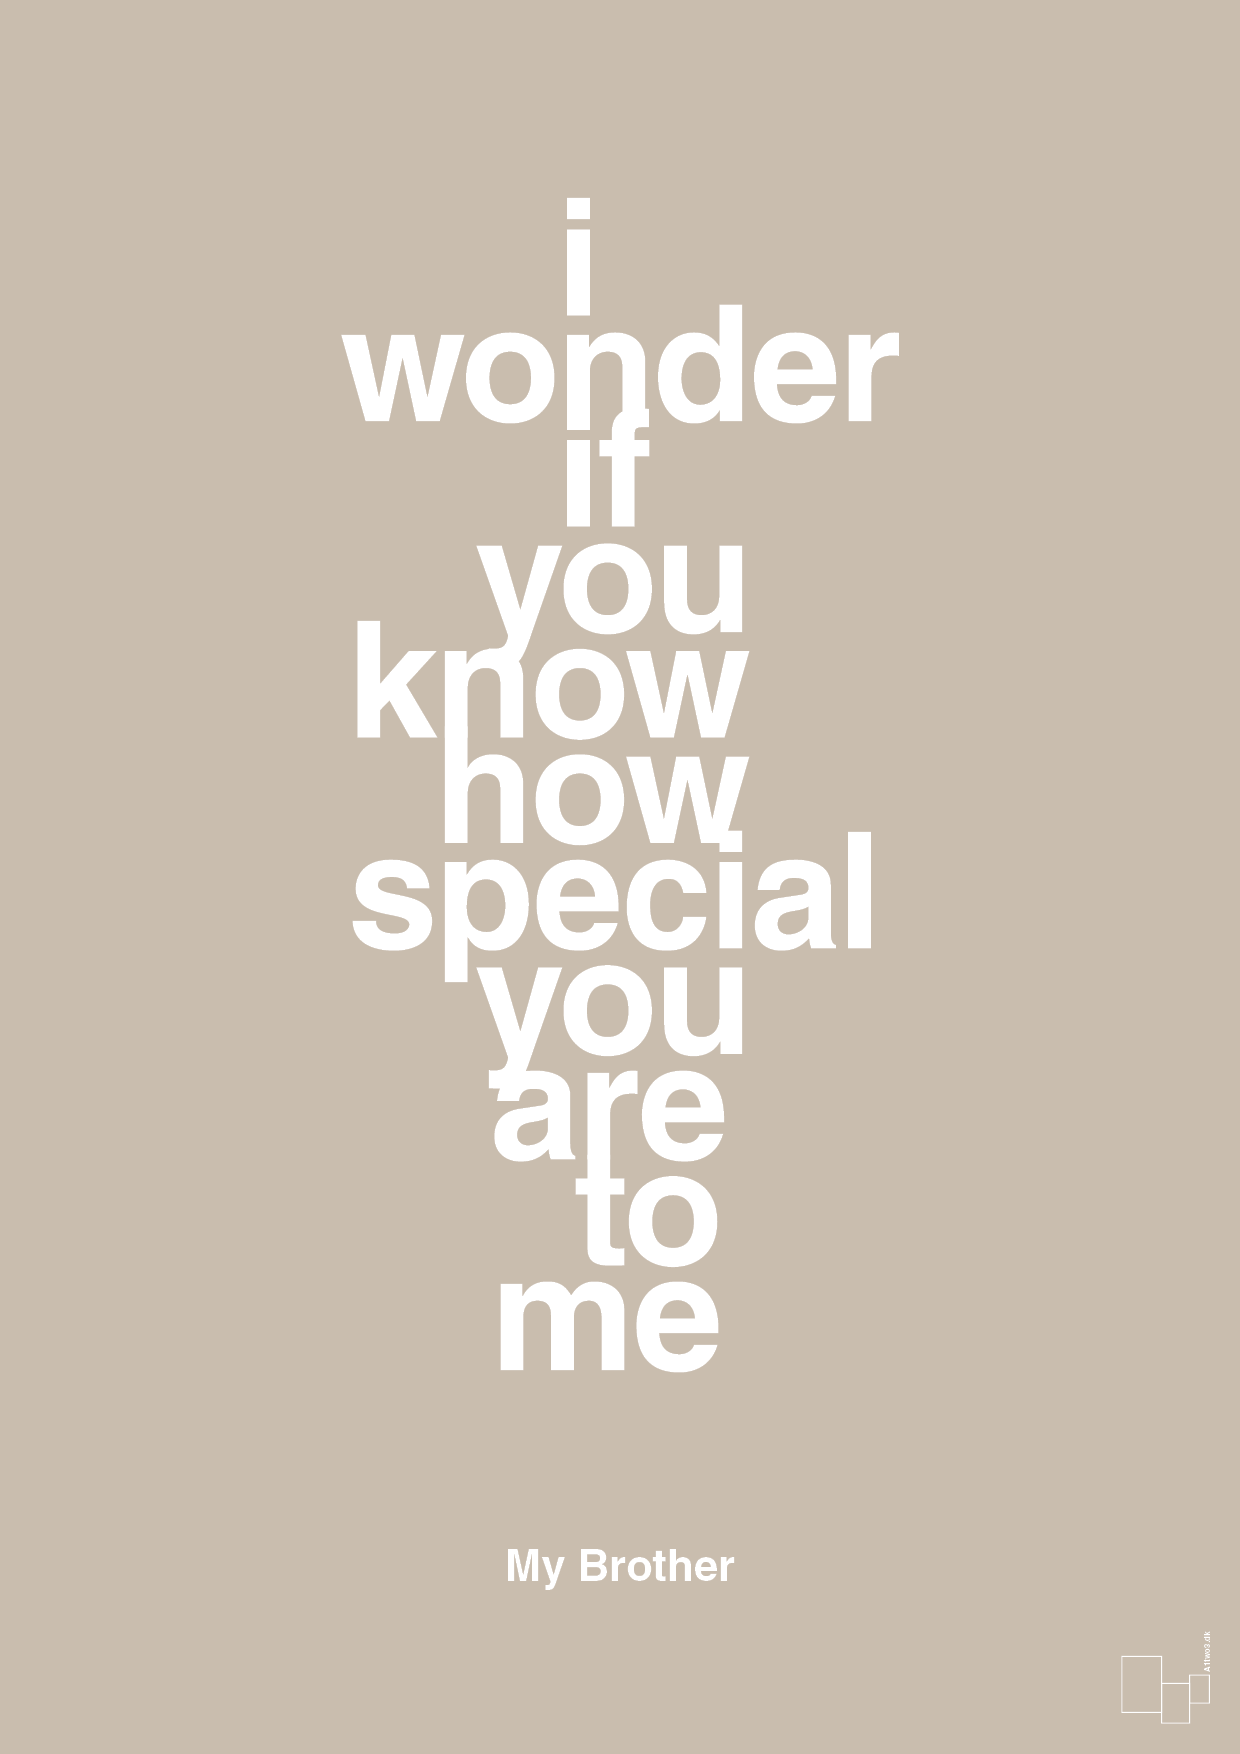 my brother - i wonder if you know how special you are to me - Plakat med Citater i Creamy Mushroom